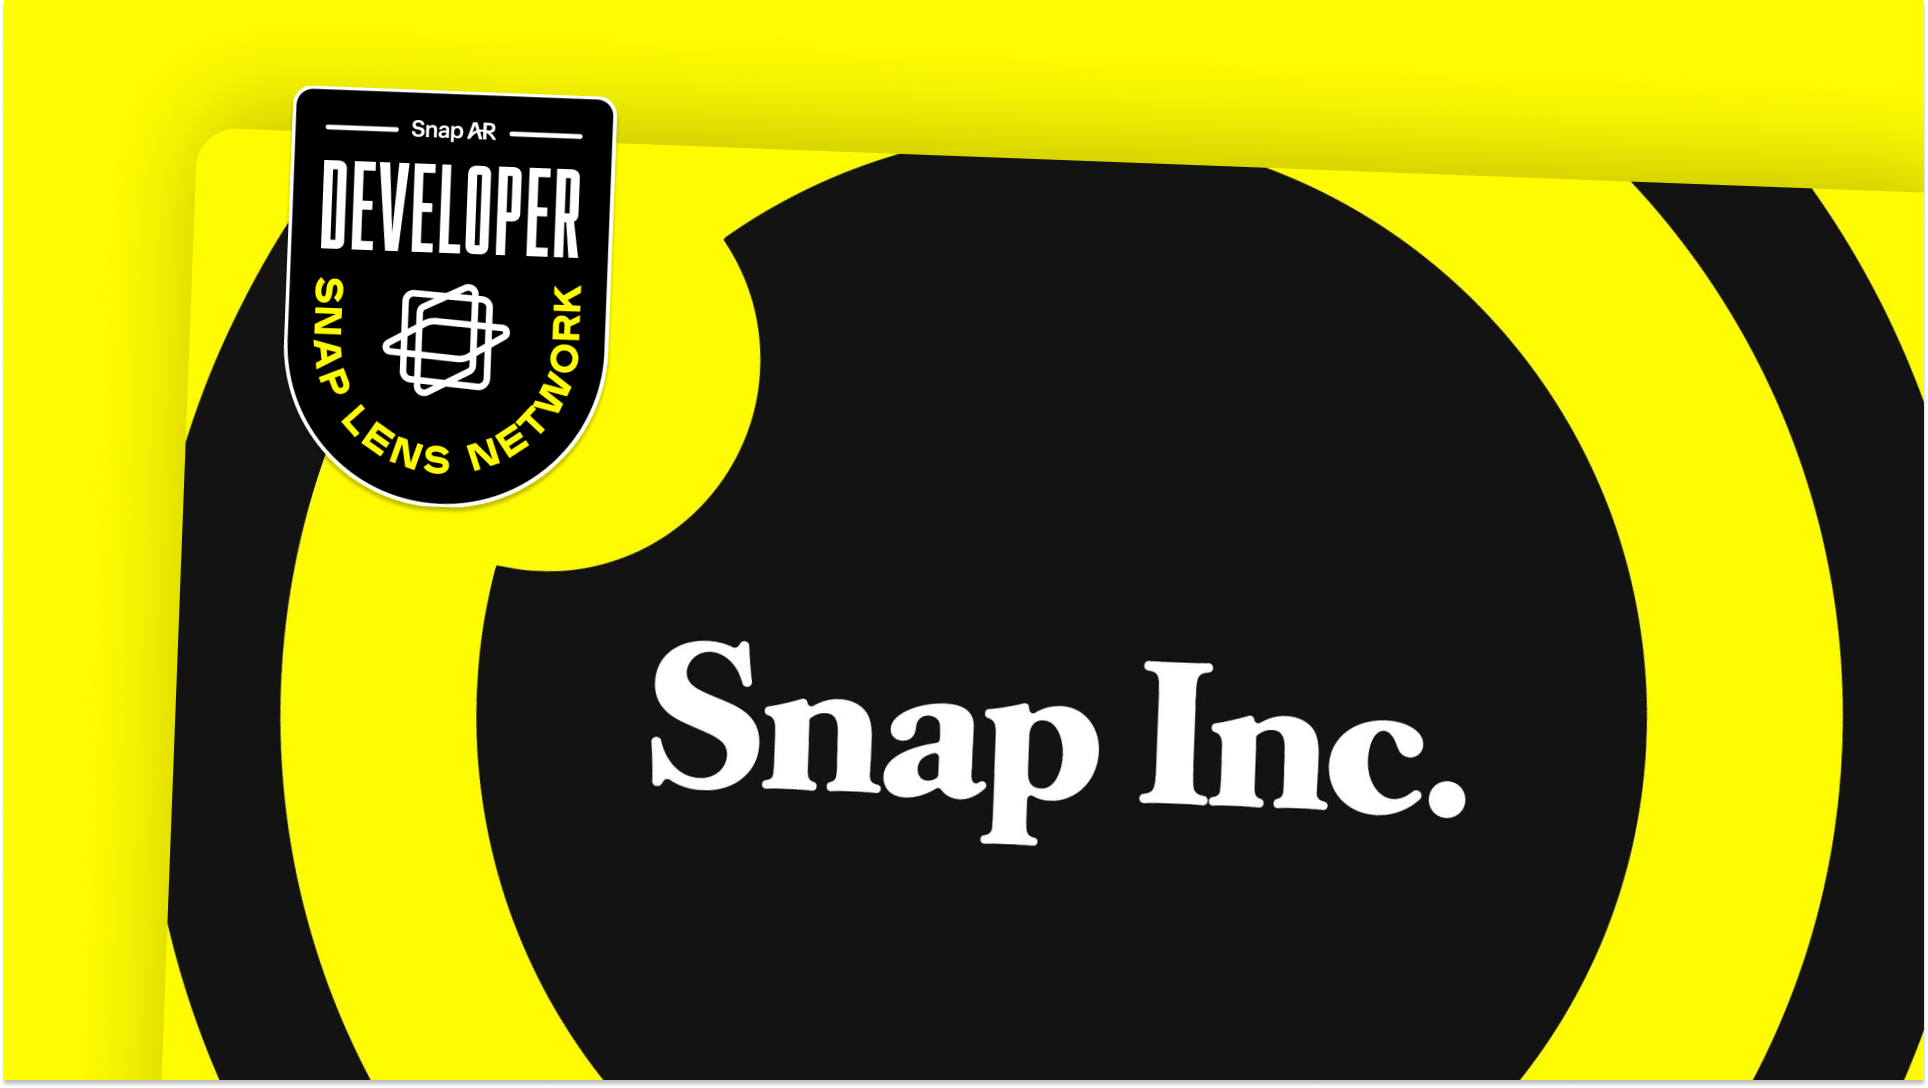 LiveWall is a partner of Snapchat